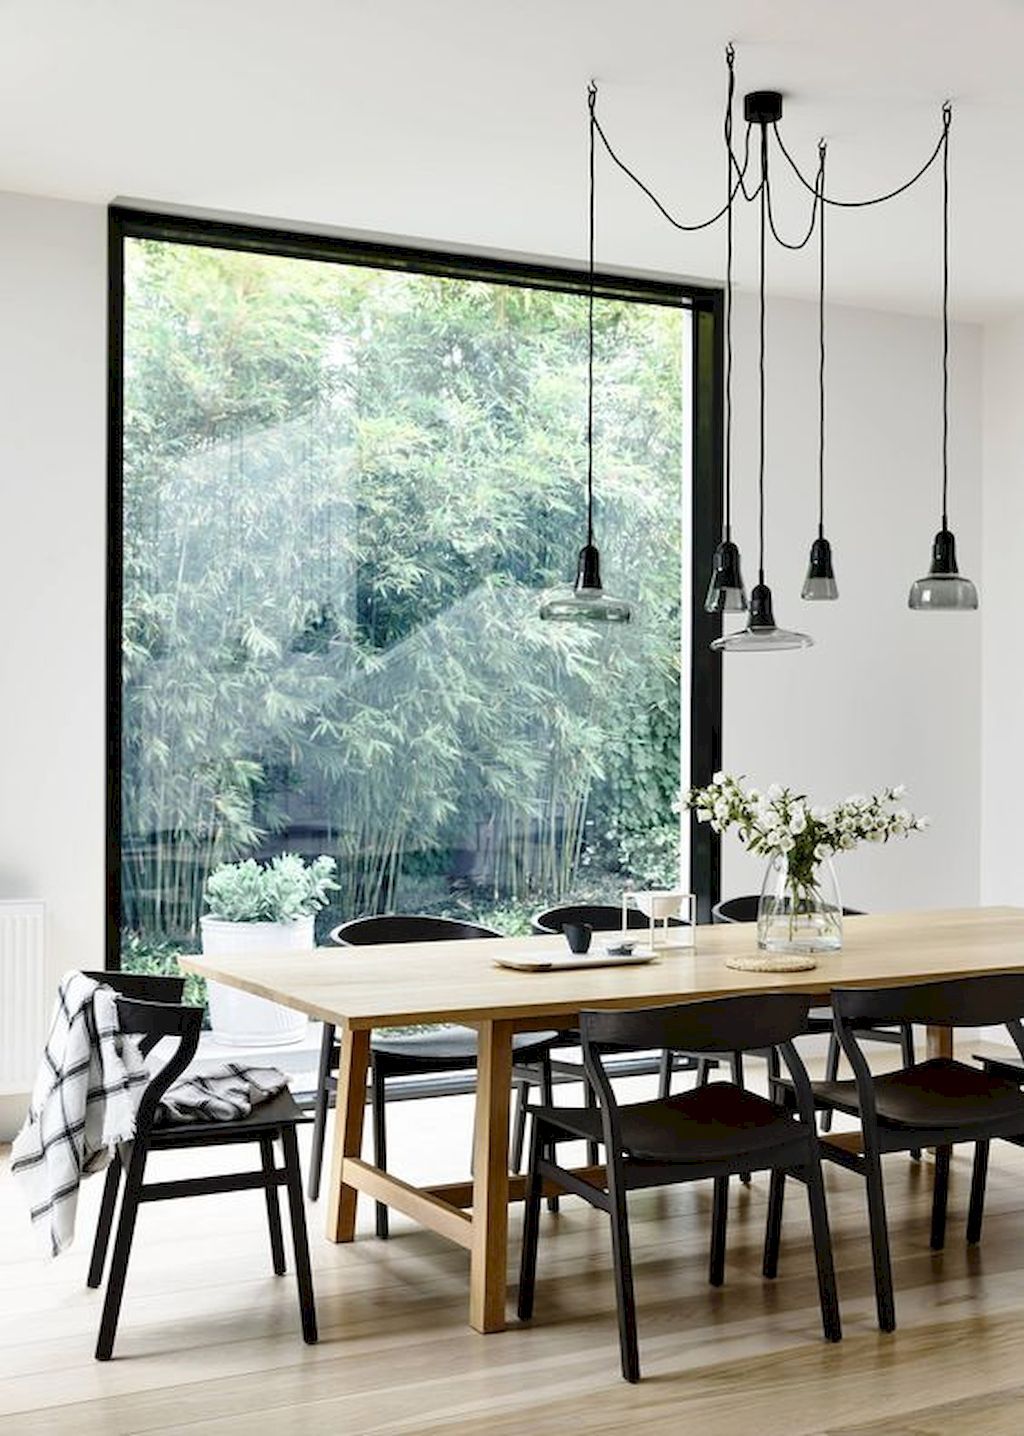 5 Dining Room Decorating Ideas You Need This Fall Season 1